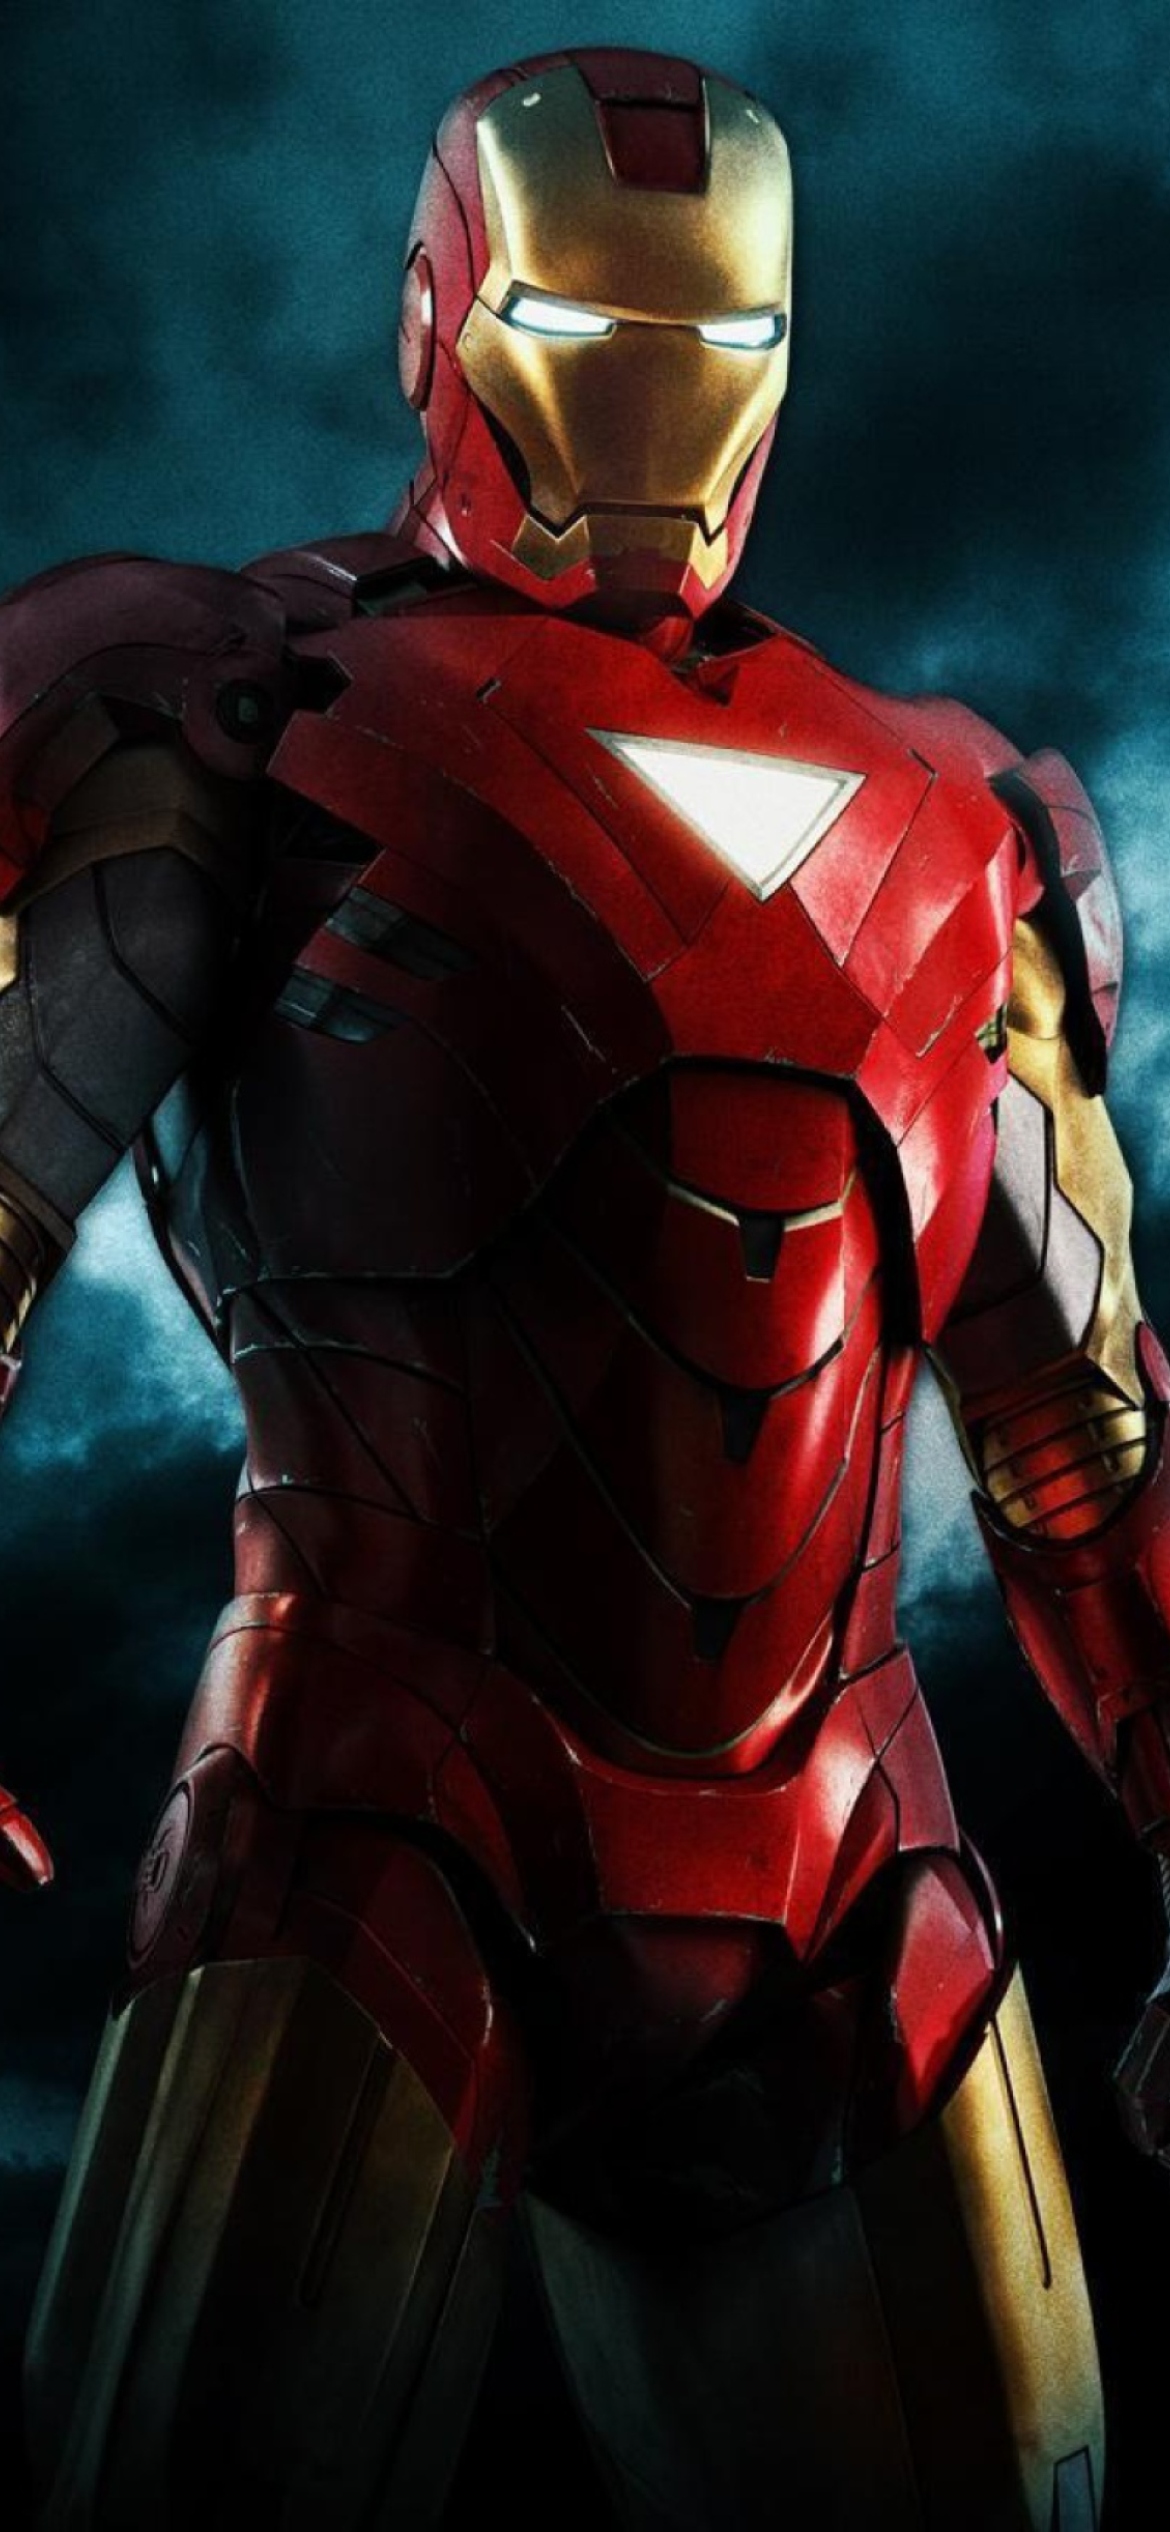 Iron Man Wallpaper For Iphone 11 Pro